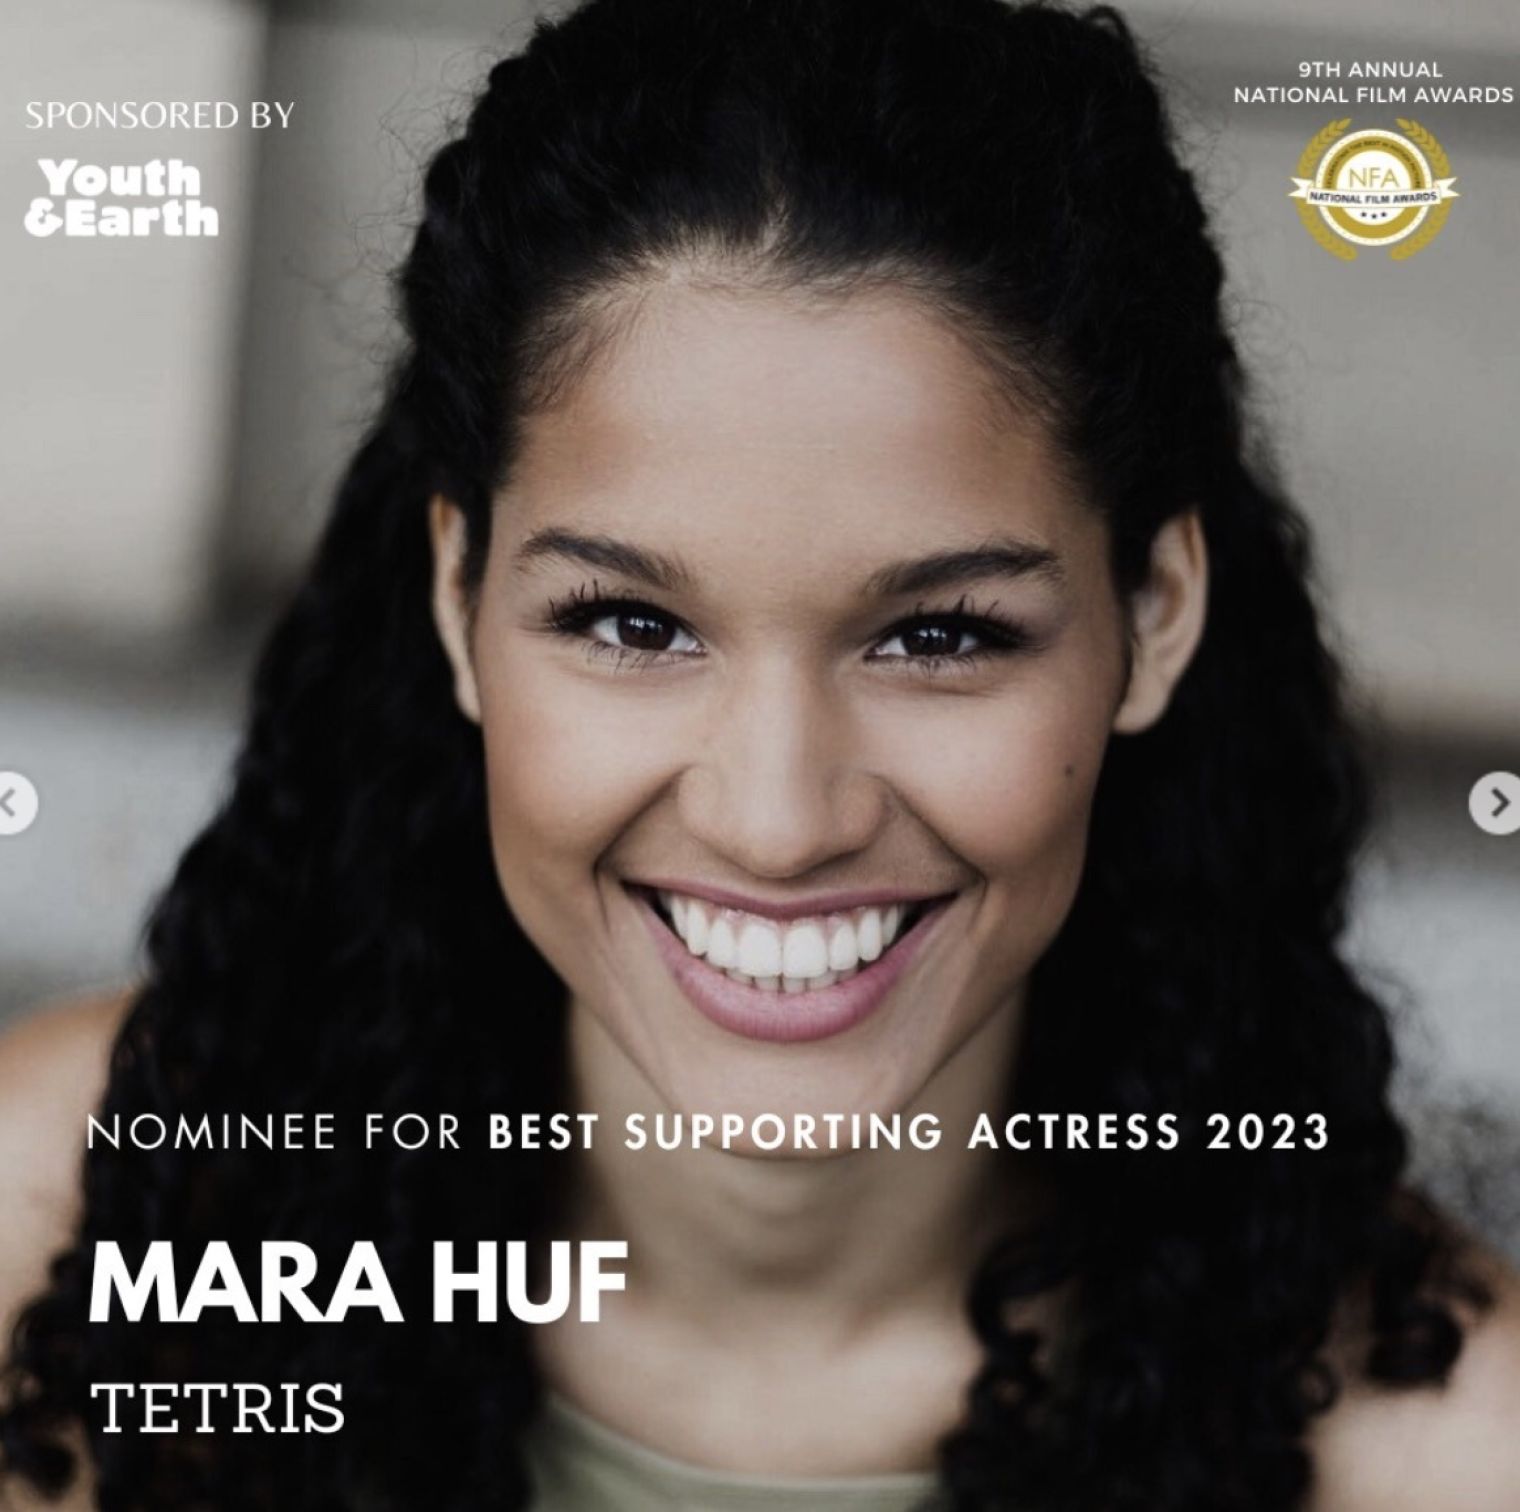 Mara Huf has been nominated for Best Supporting Actress in the National Film Awards for her role as Tracy in 'Tetris'